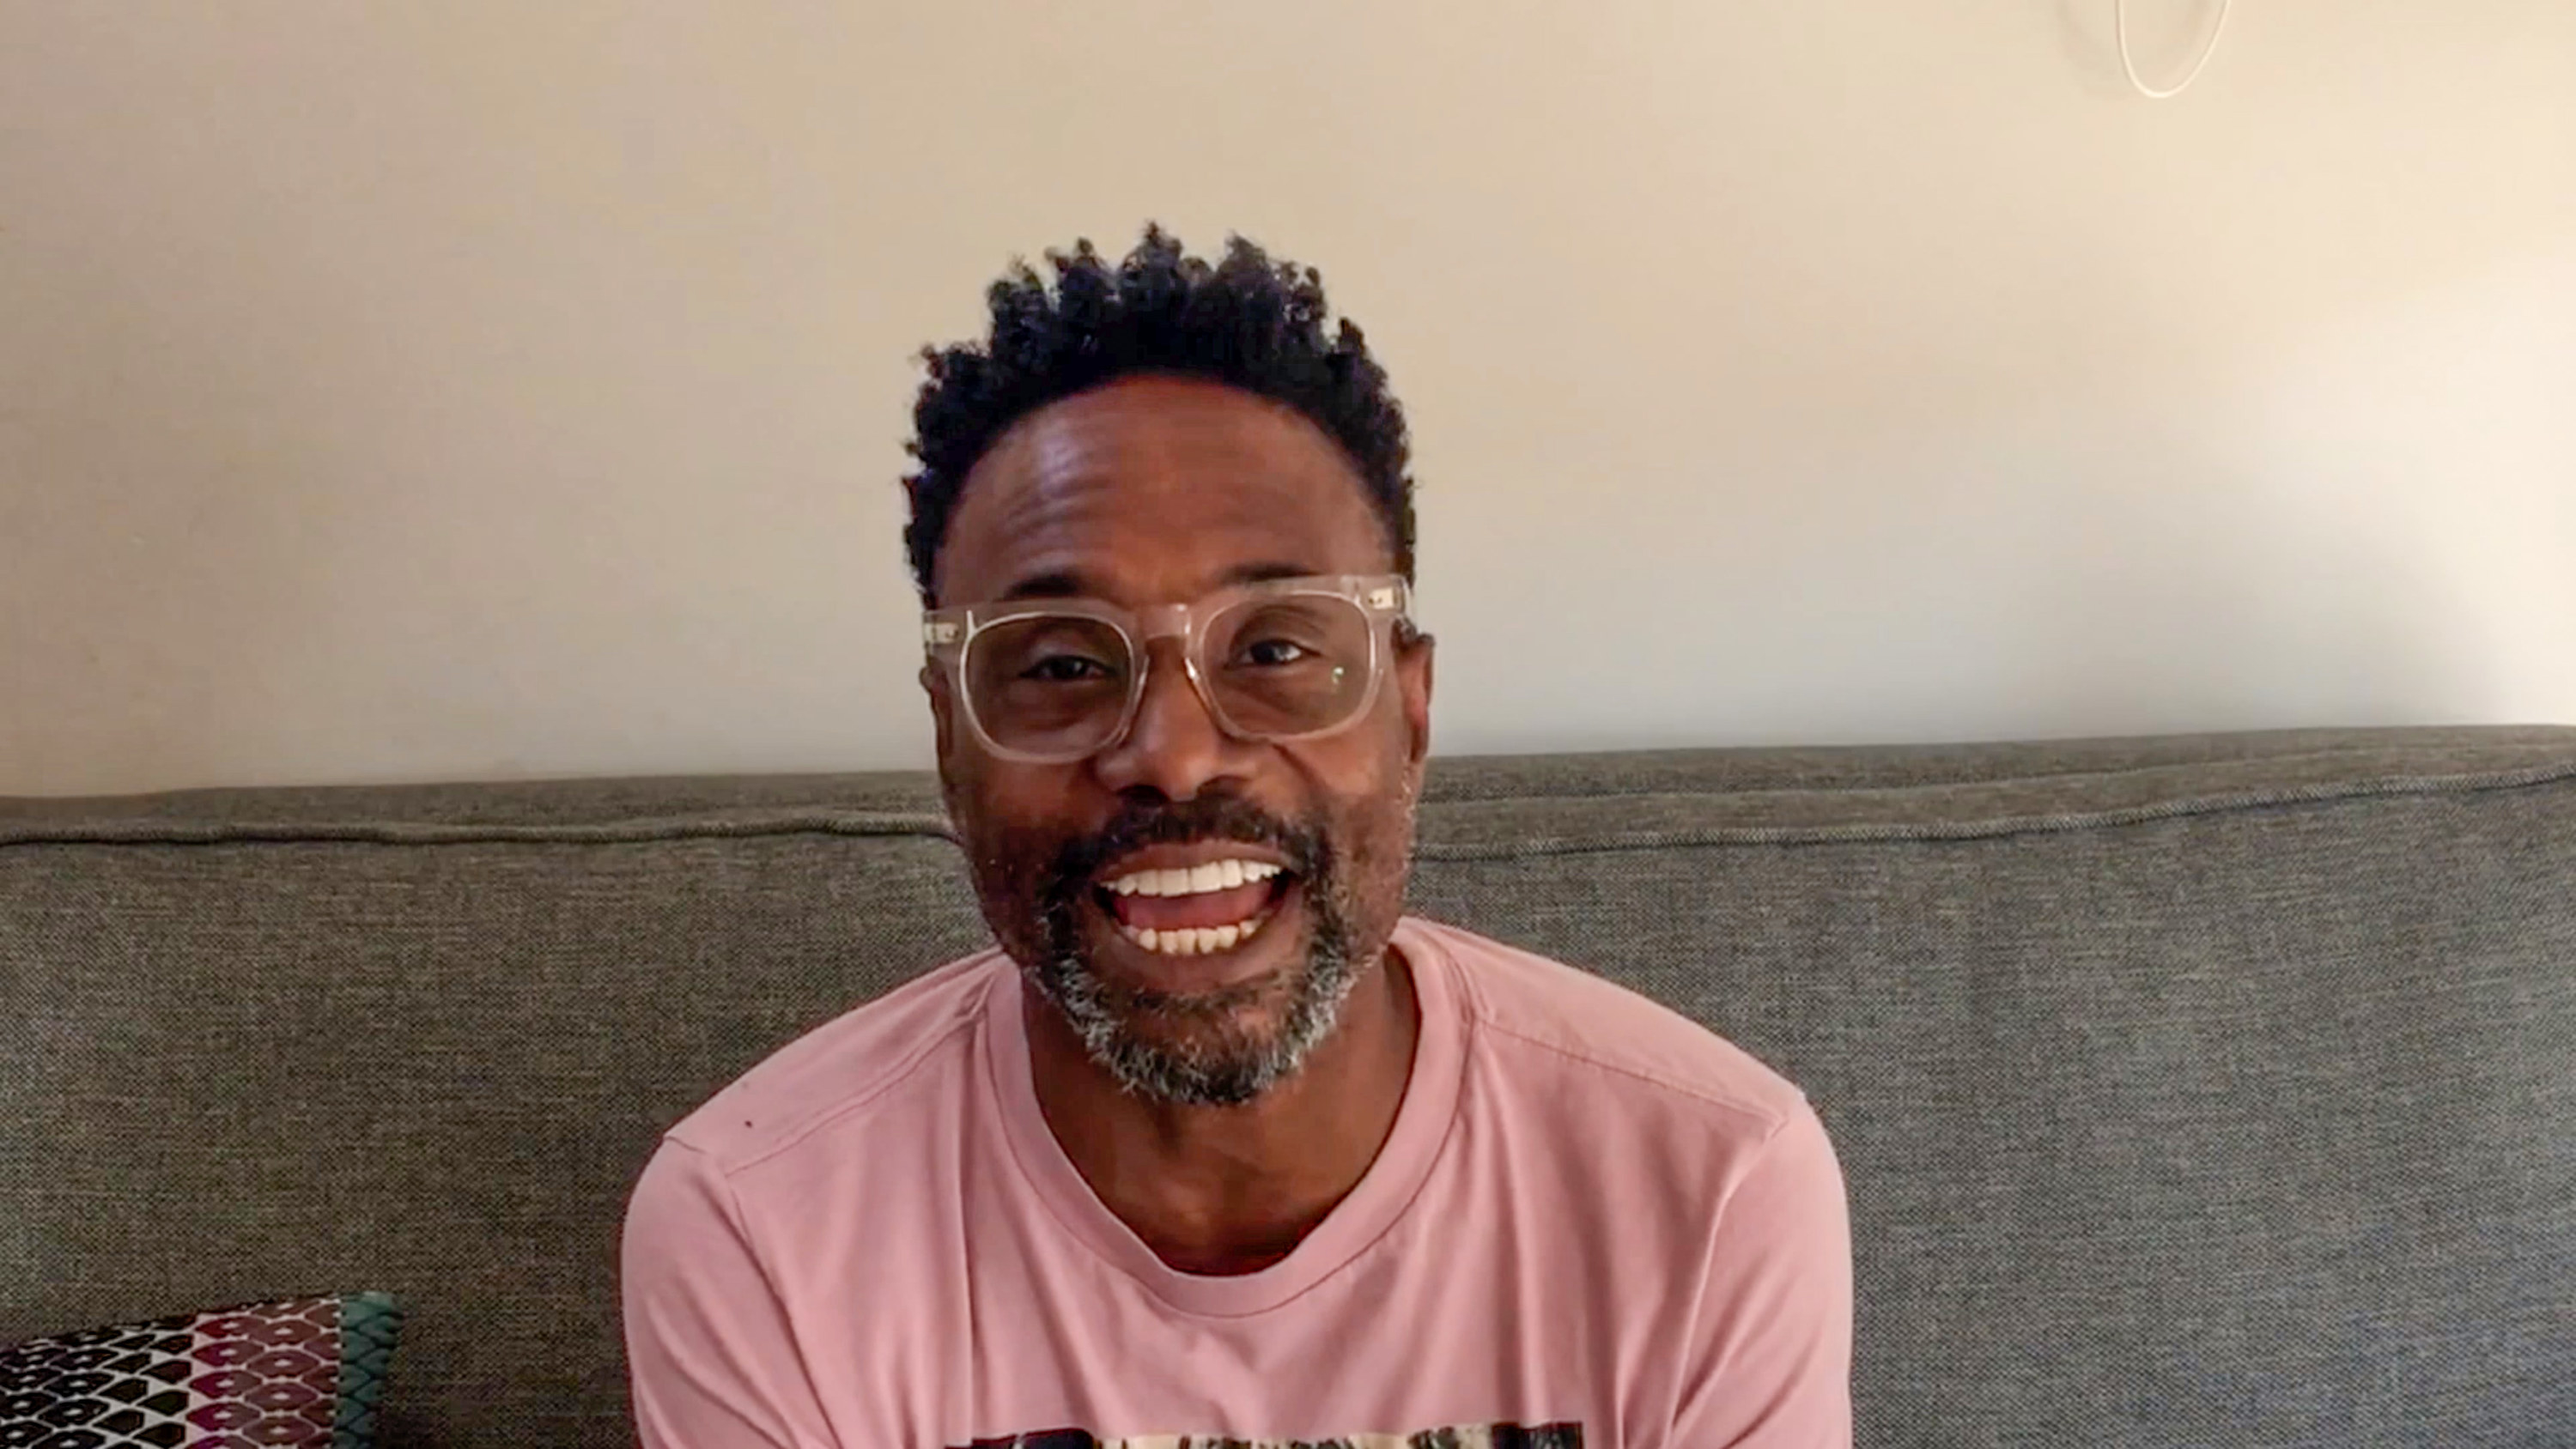 Billy Porter speaking to a camera